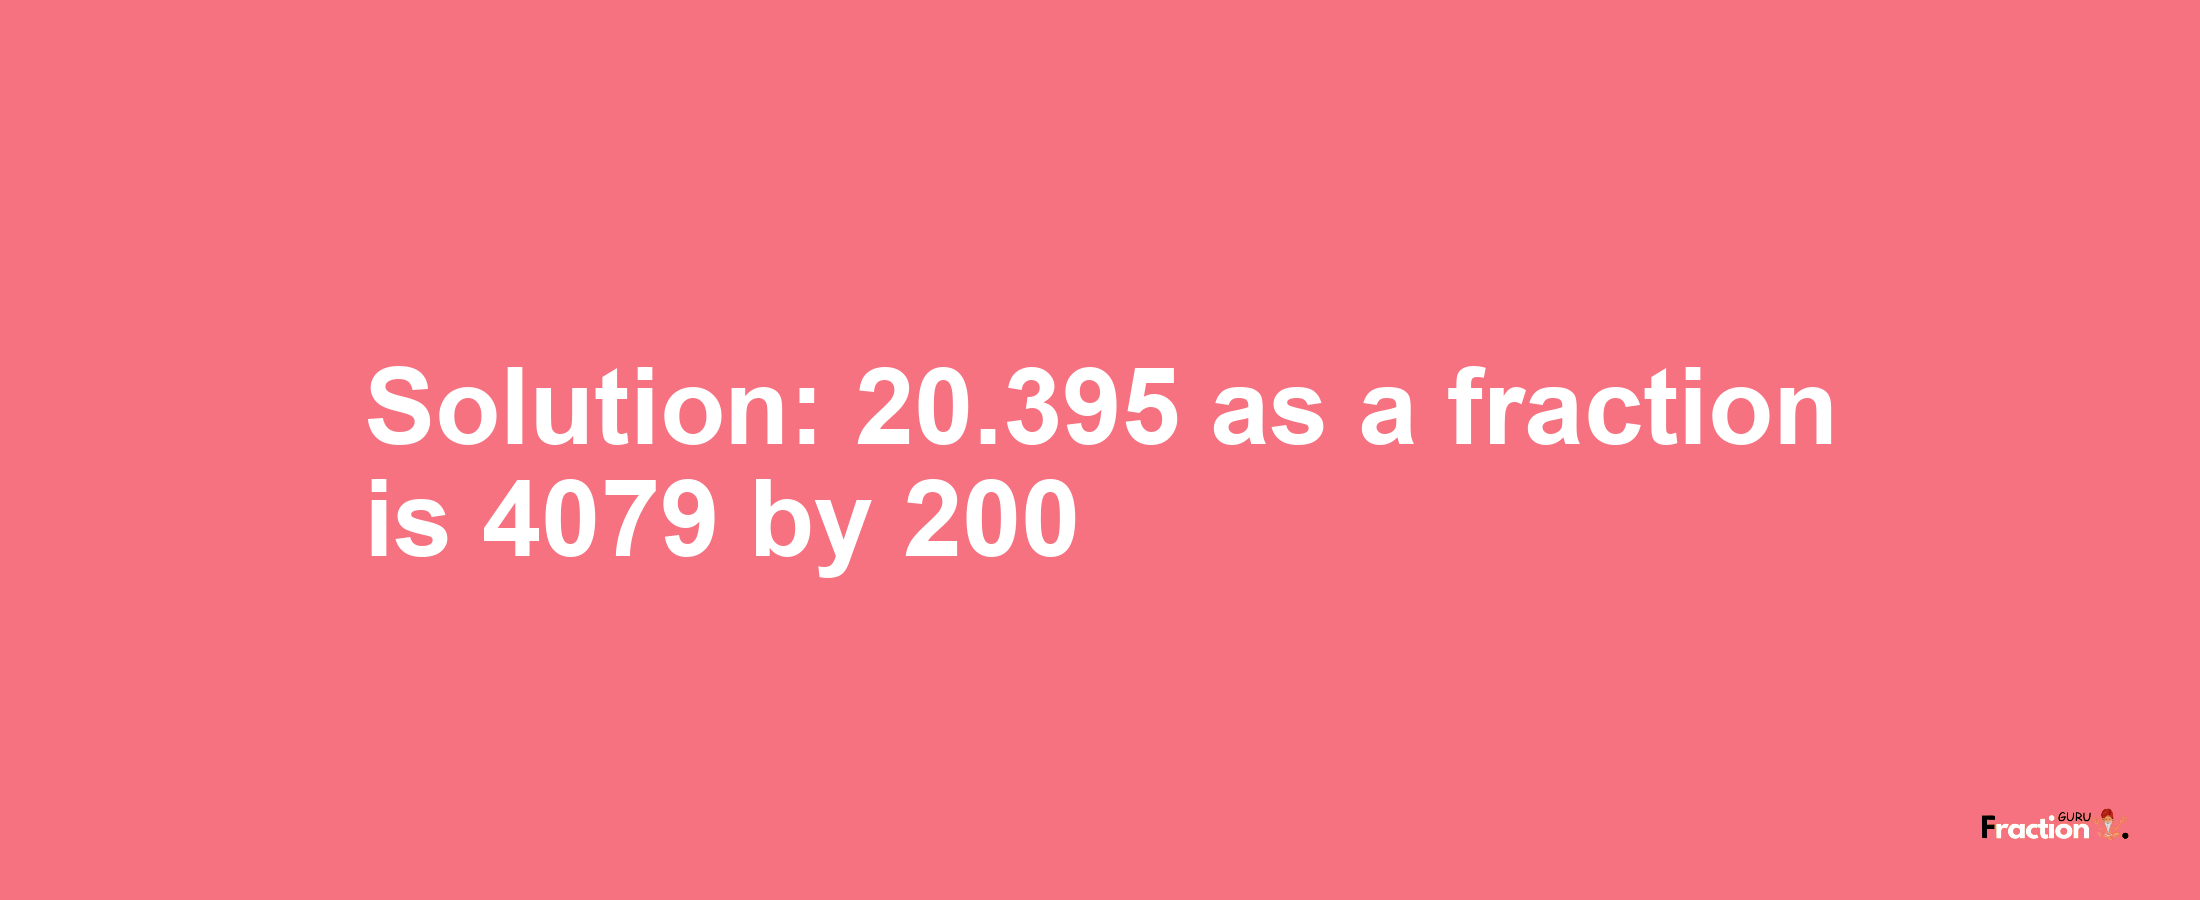 Solution:20.395 as a fraction is 4079/200